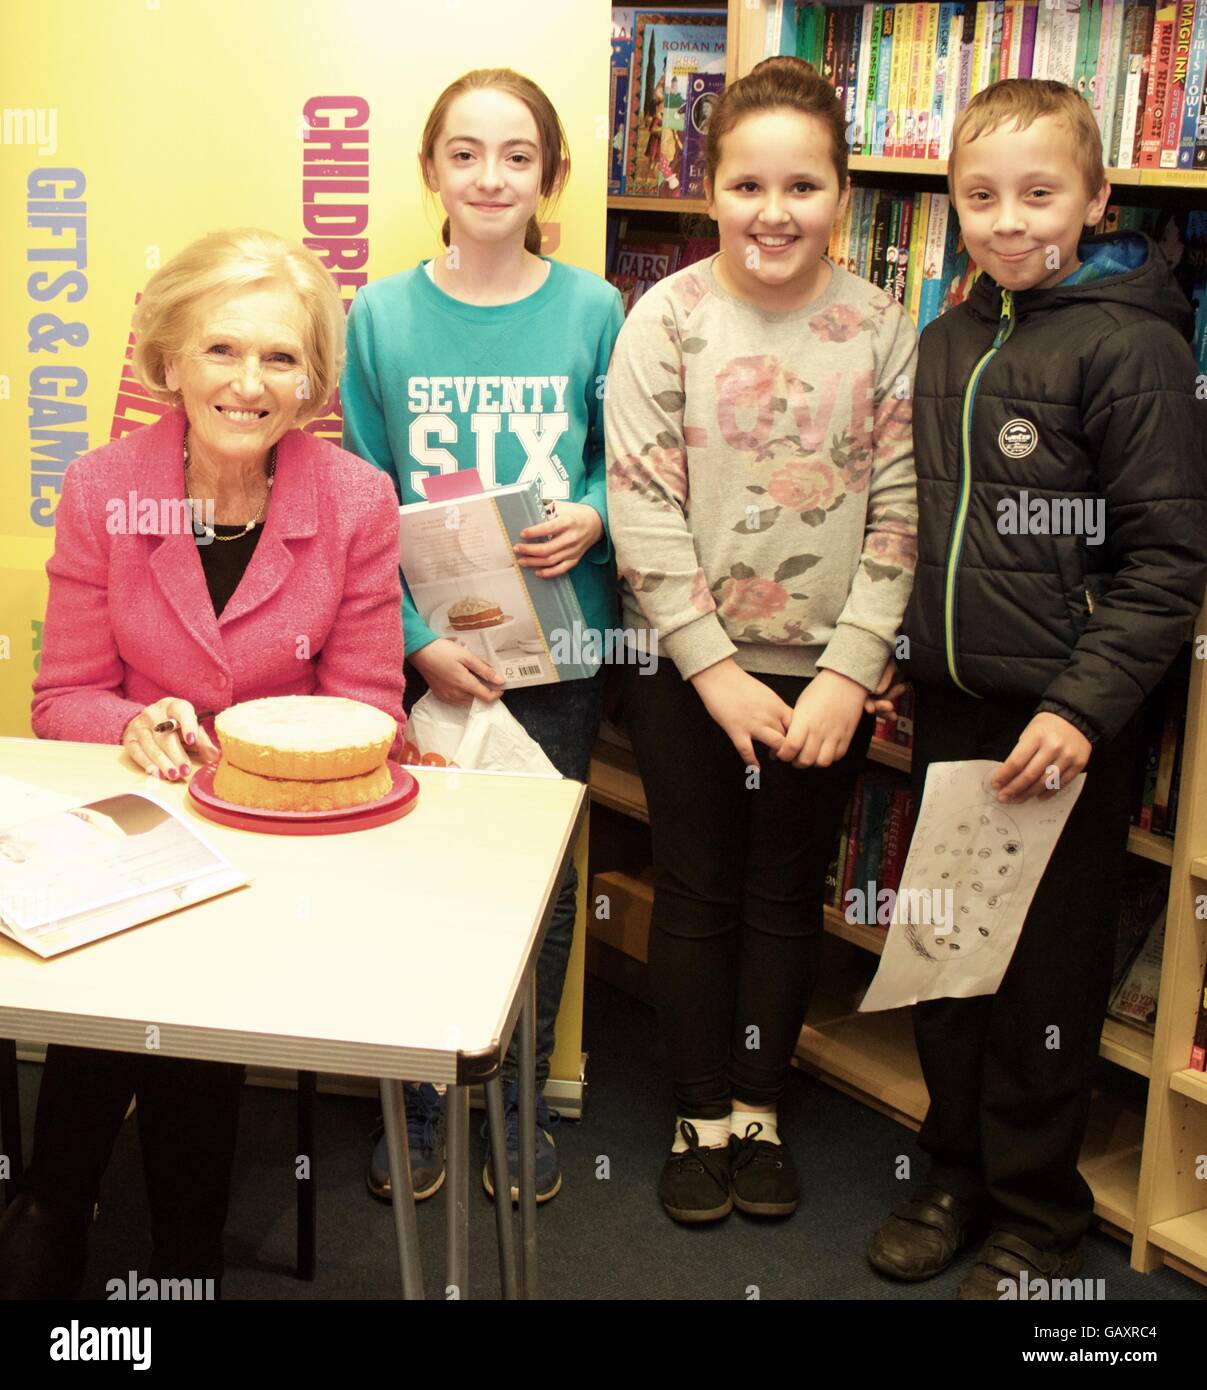 Mary Berry at her booksigning in Woodley Stock Photo